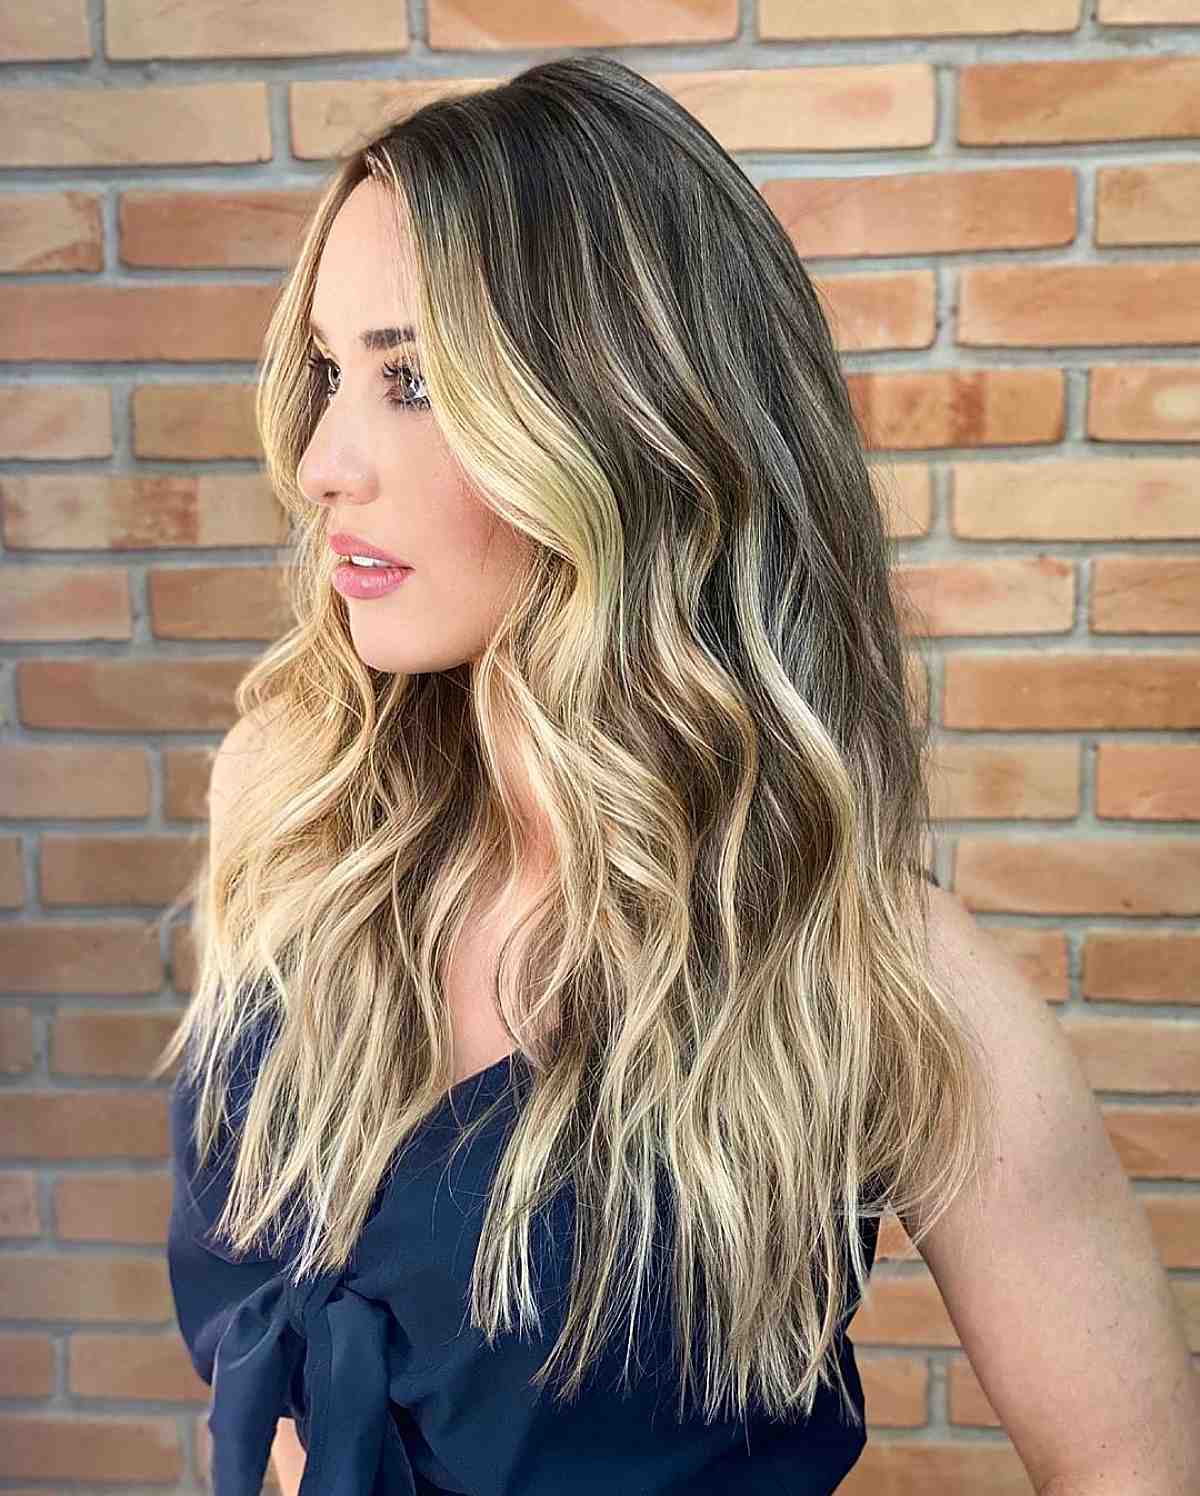 Light Brown Hair With Face-Framing Blonde Highlights